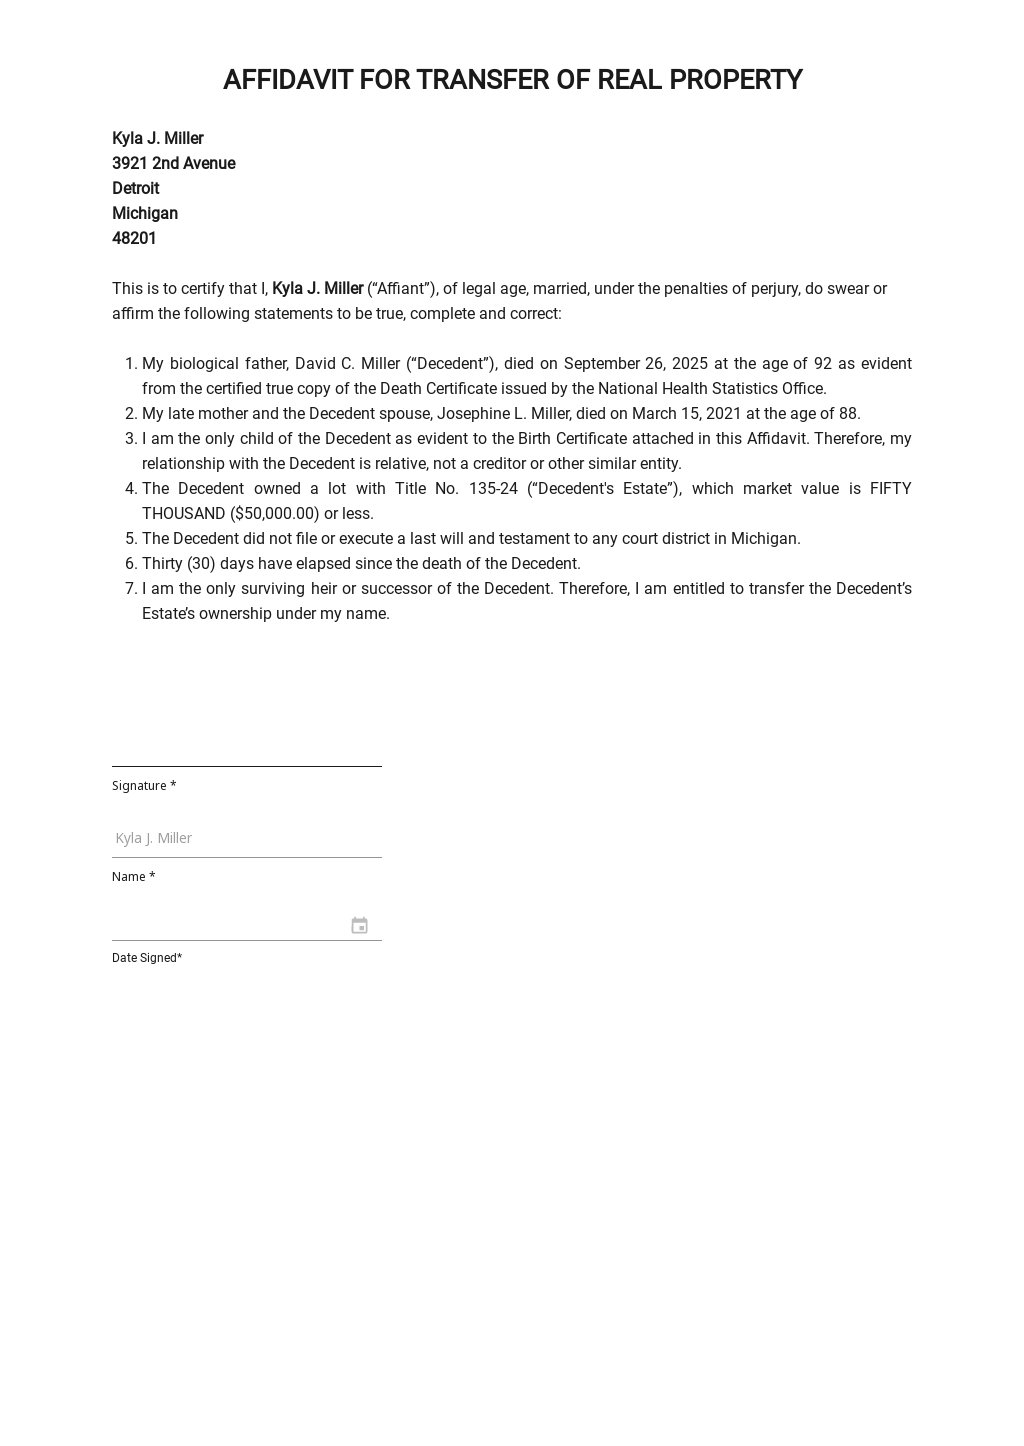 Affidavit for Transfer of Real Property Template in Word, Google Docs